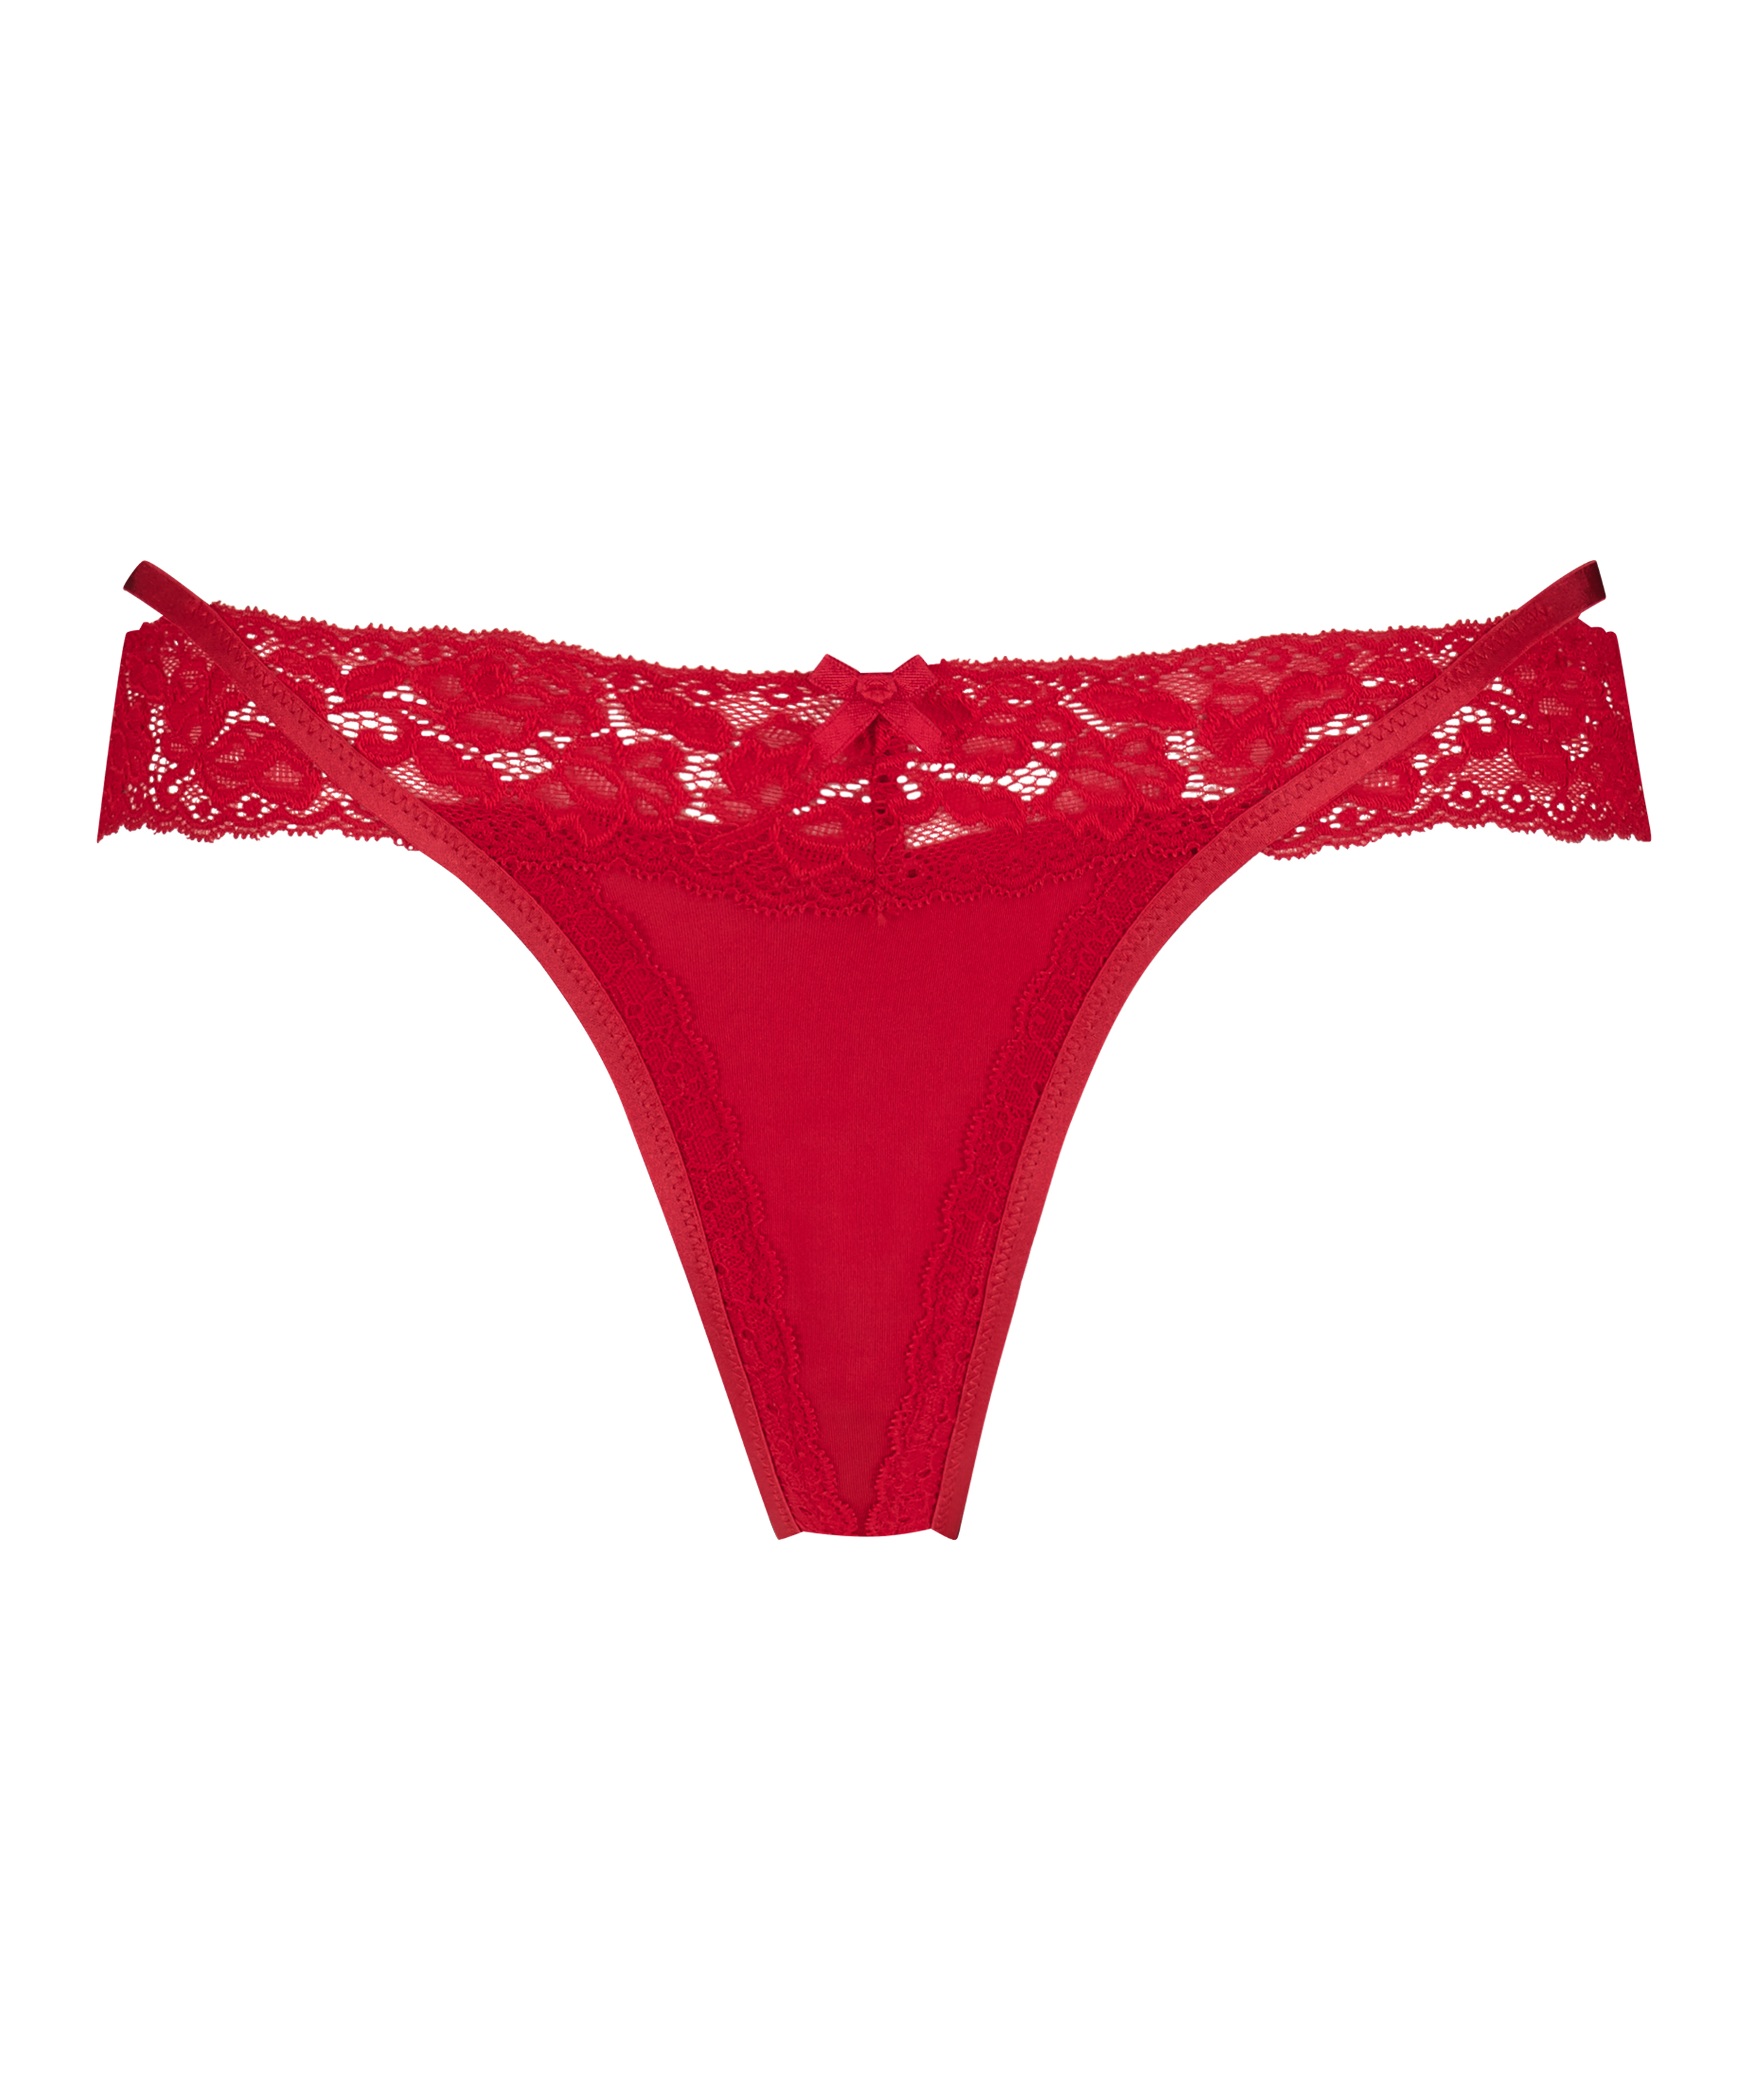 Elliena Extra Low V Thong, Red, main